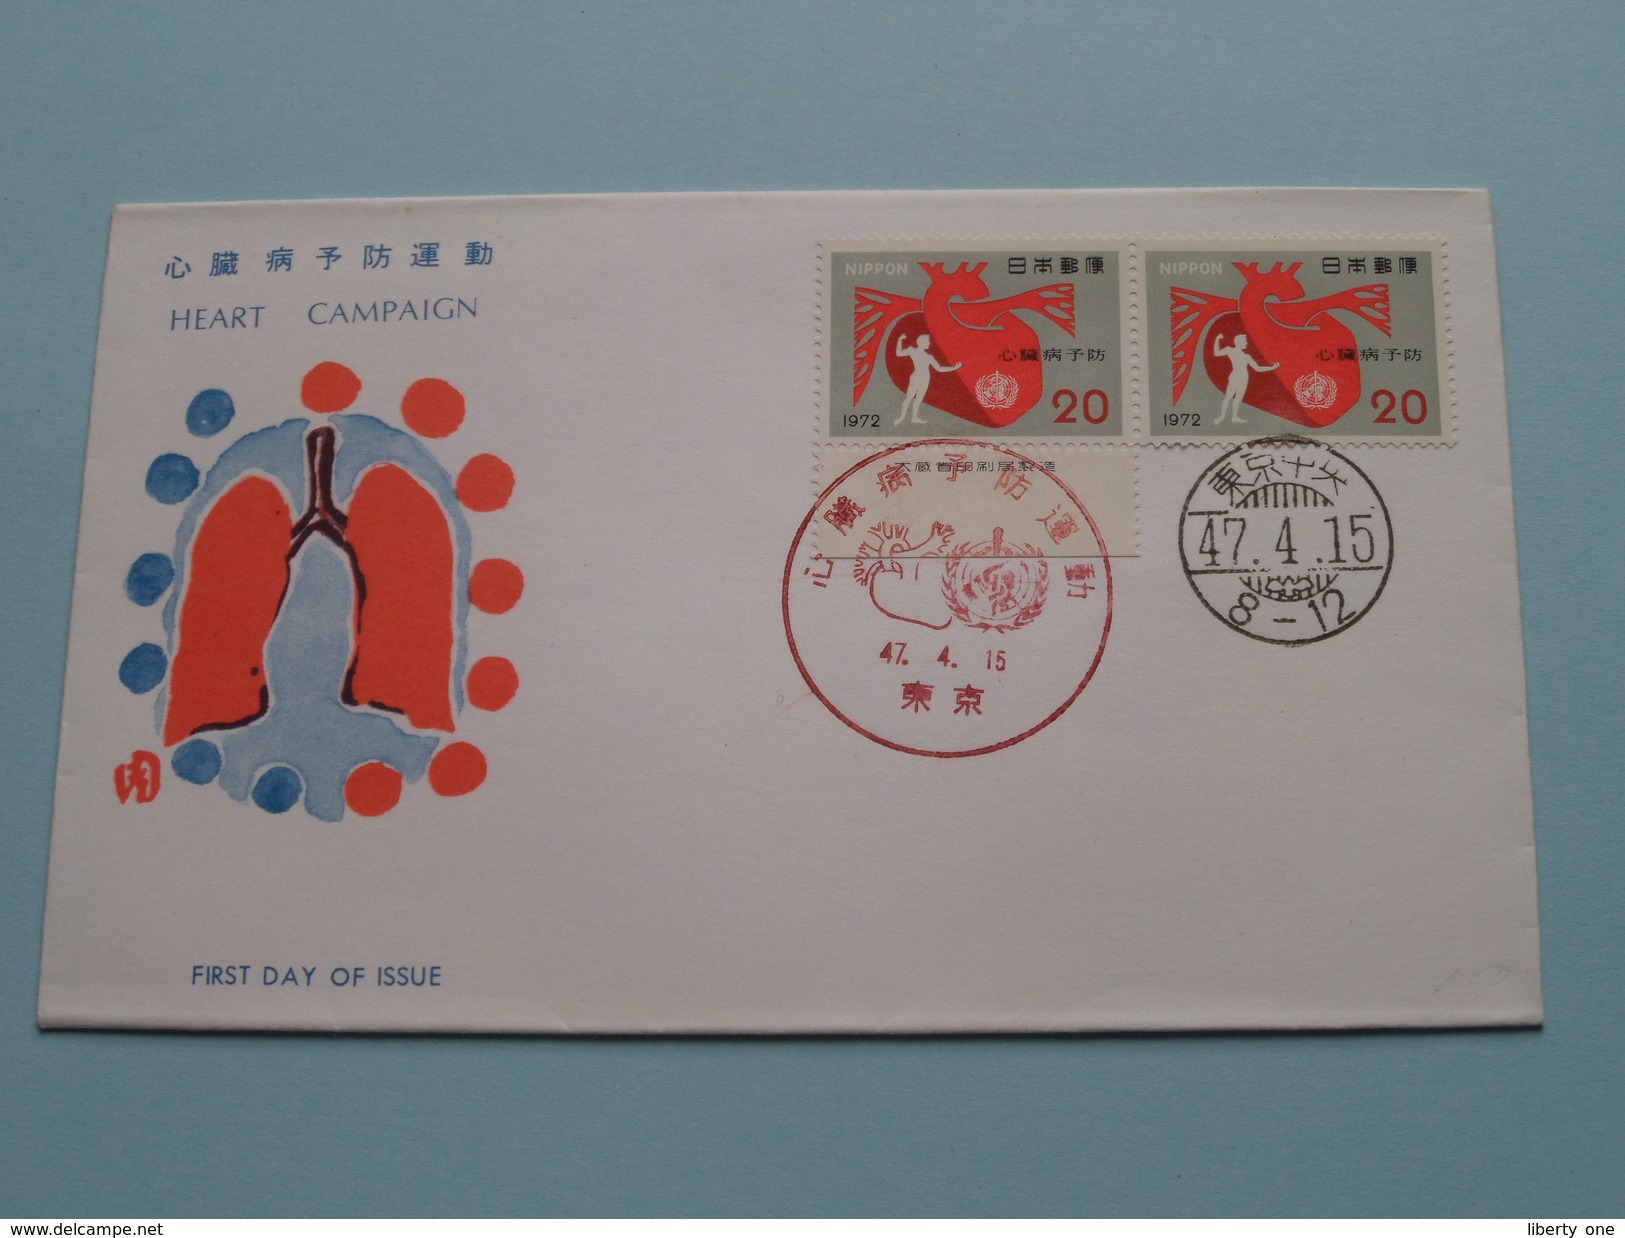 HEART CAMPAIGN 47-4-15 ( 1972 ) ( The Society For Promotion Of Philately ) ! - FDC